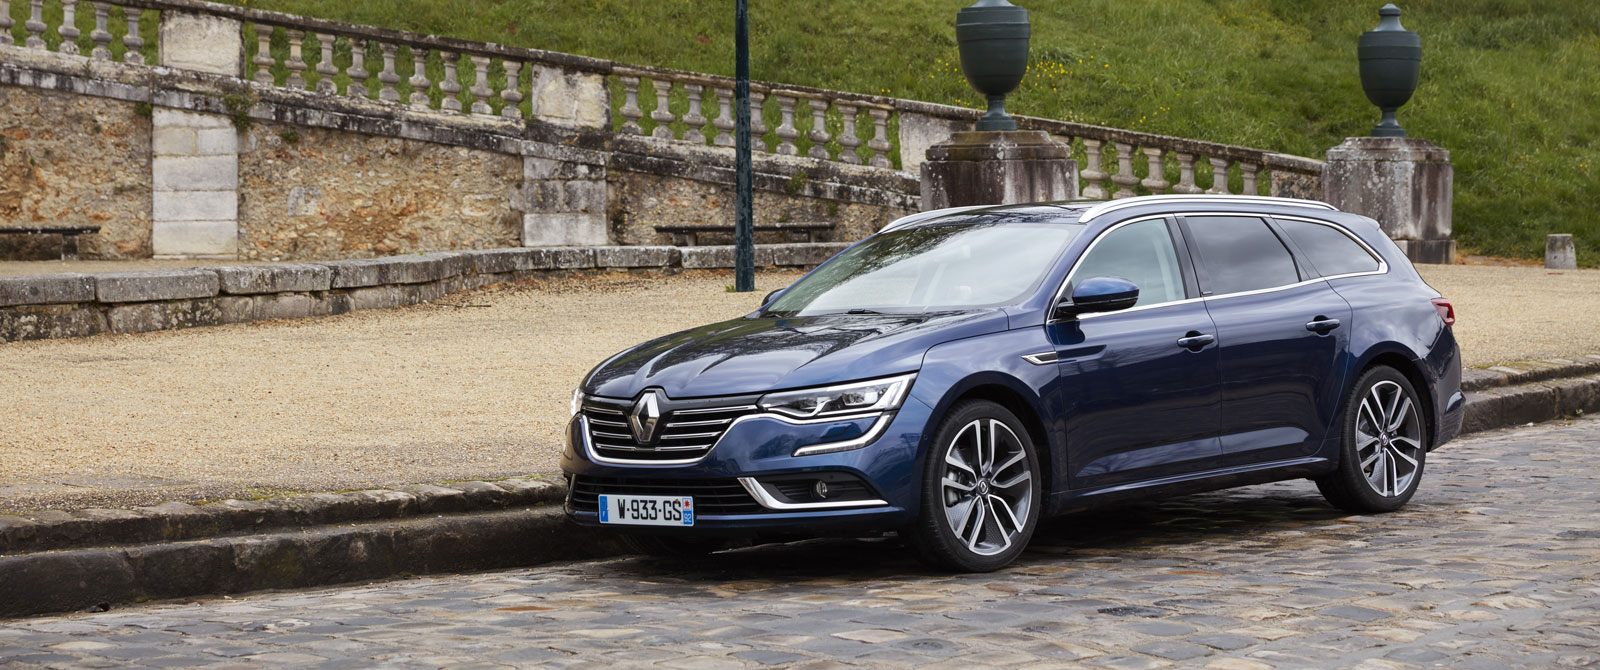 Talisman Estate, Renault's new estate car, is here - Renault Group